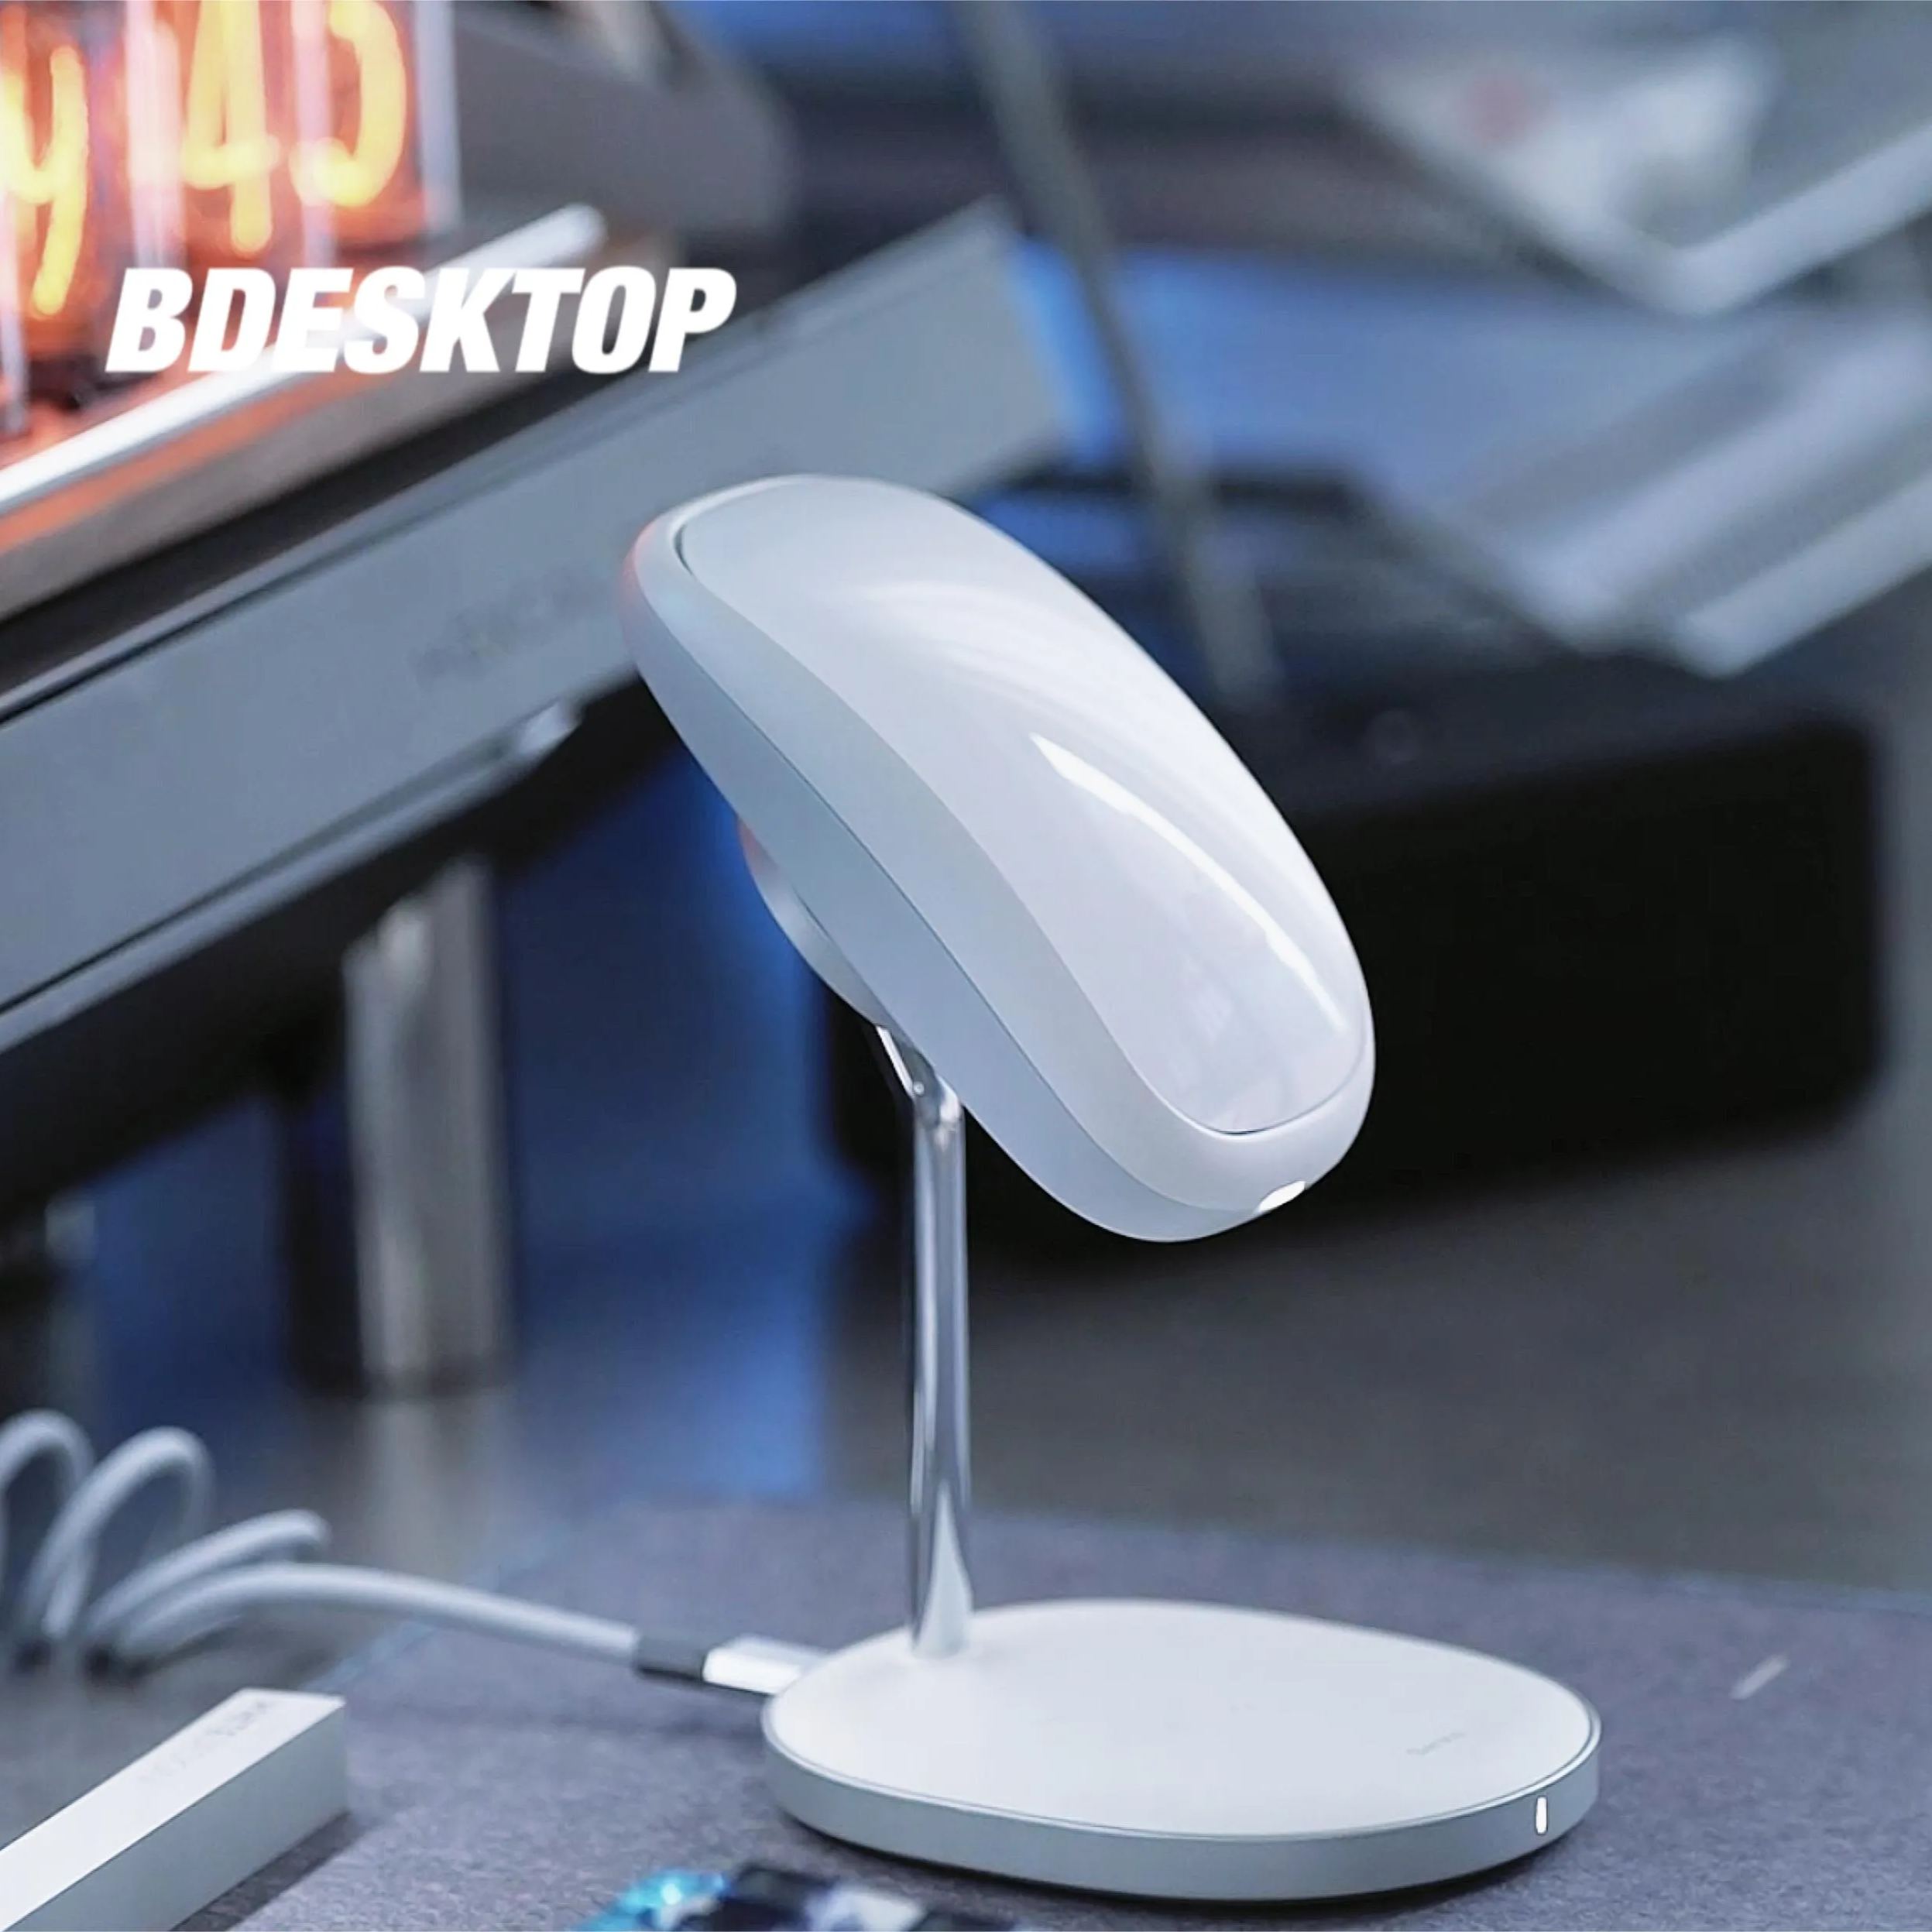 Bdesktop Design Shop | The smart mouse optimized base feels comfortable and can be used as a transfer magnet charger（Only applicable to Apple official genuine mouse）